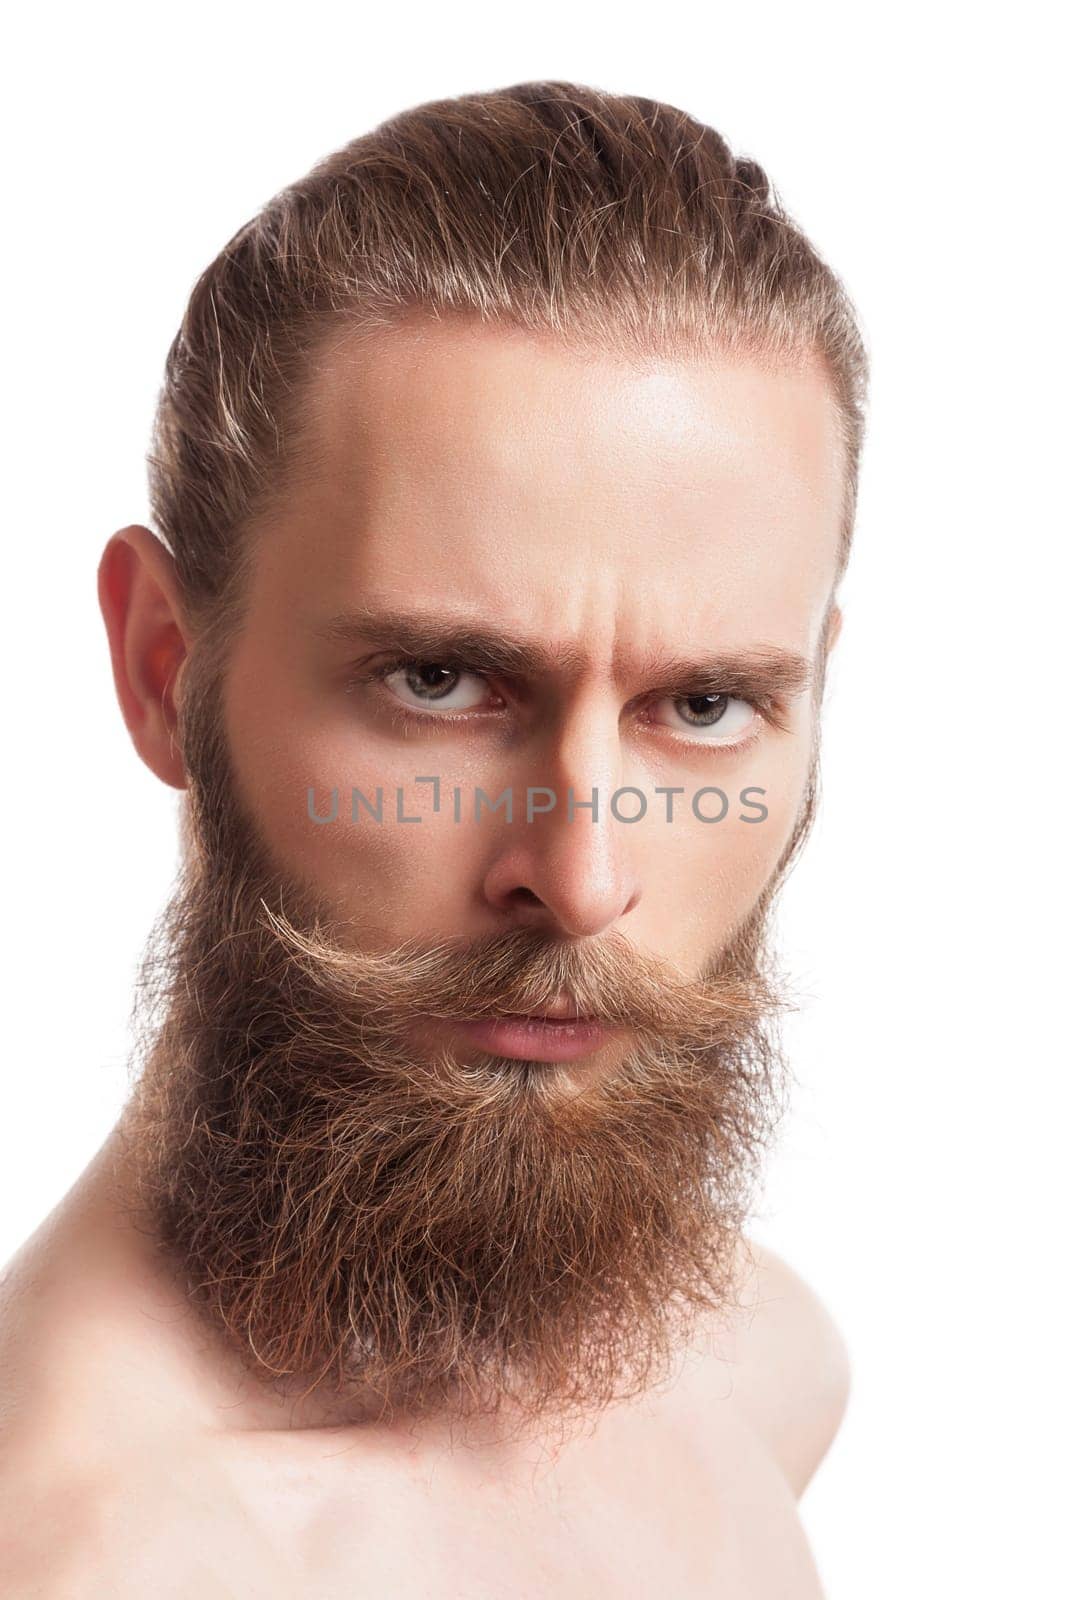 Bearded hipster looking at camera isolated on white background in studio photo. Cool stylish caucasian hipster